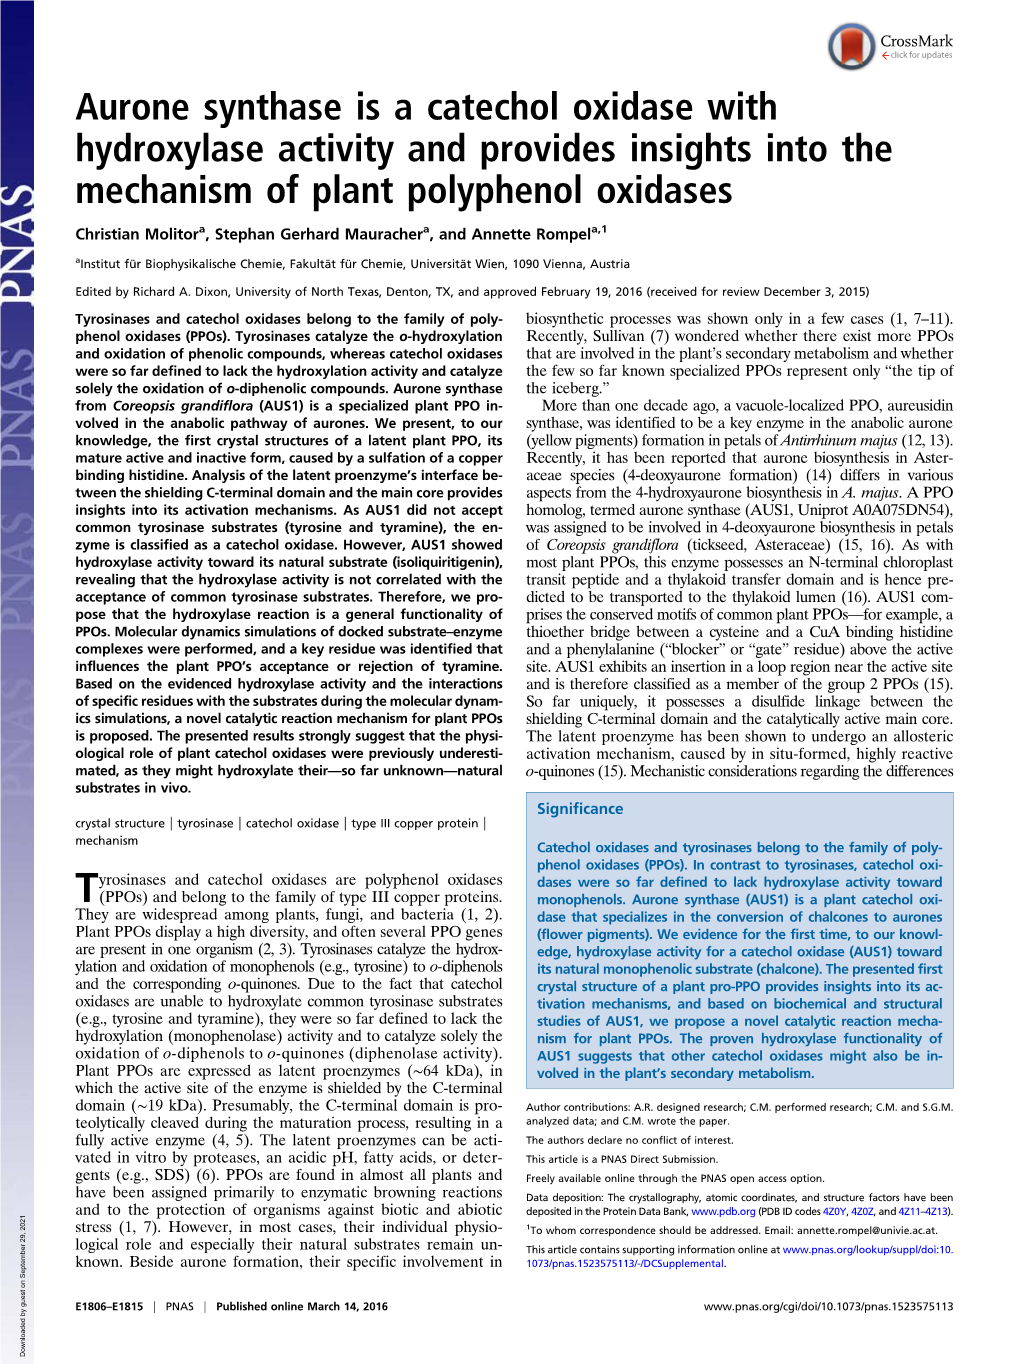 Aurone Synthase Is a Catechol Oxidase with Hydroxylase Activity and Provides Insights Into the Mechanism of Plant Polyphenol Oxidases